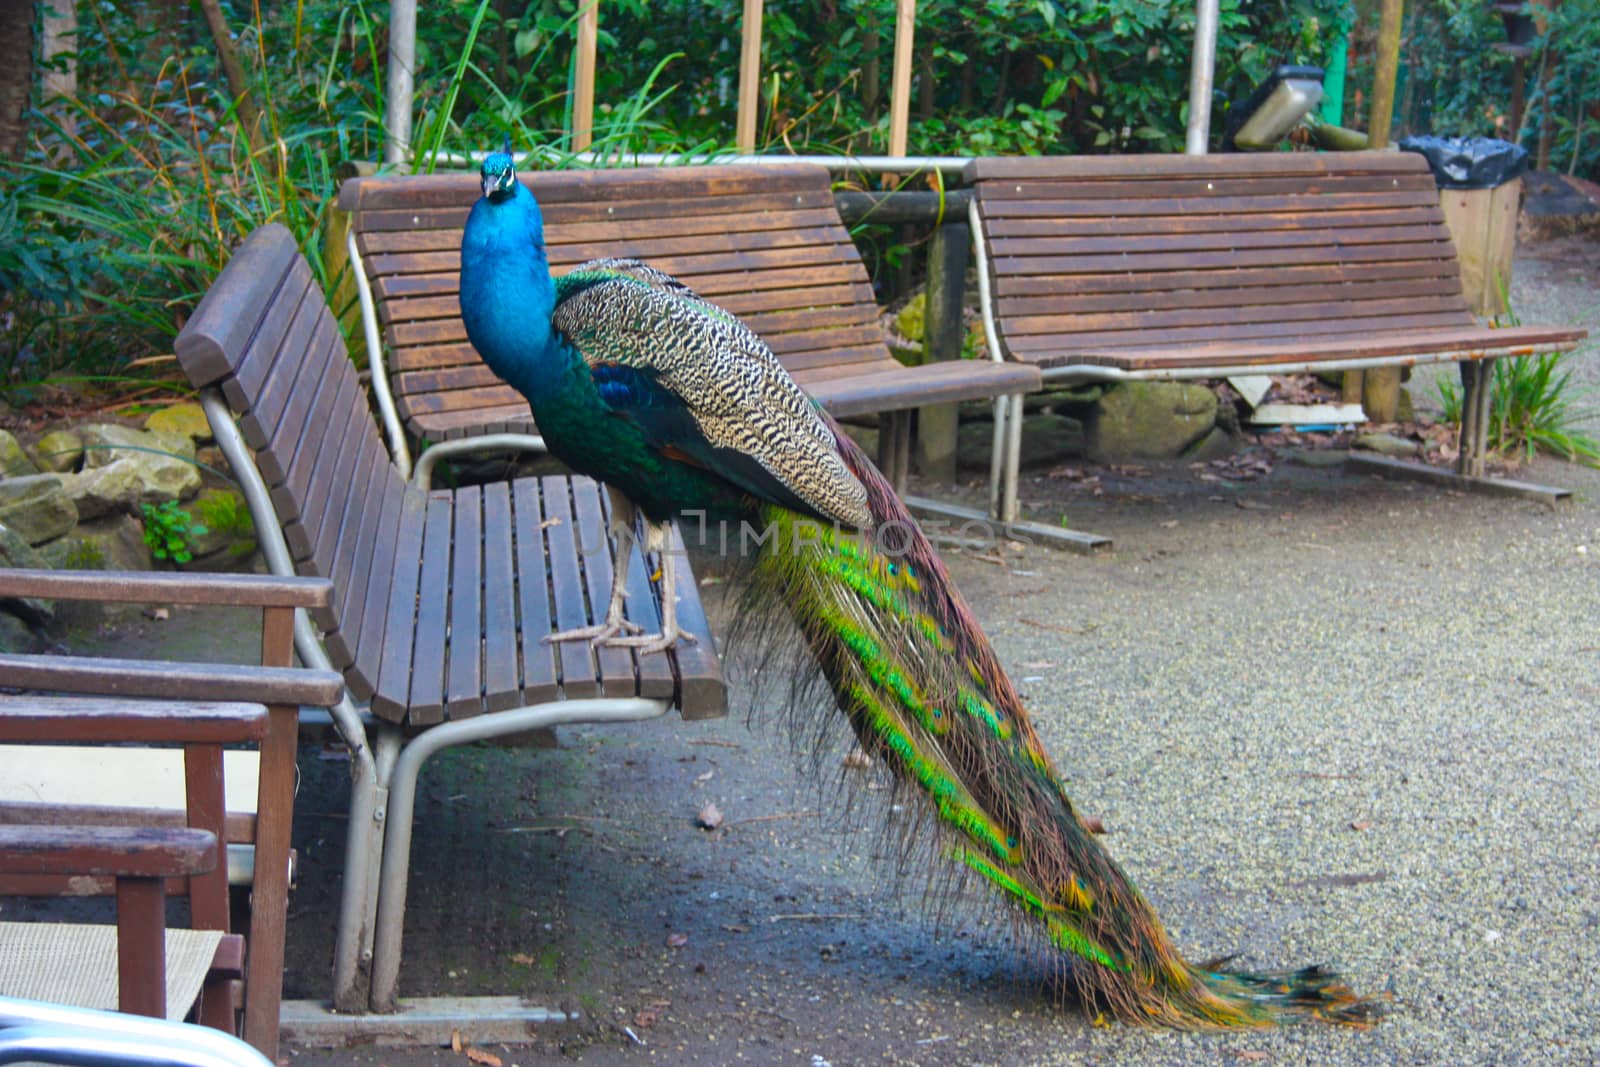 a beautiful specimen of peacock with a colorful tail in bright green and blue colors in a park on a wooden bench in tuscany